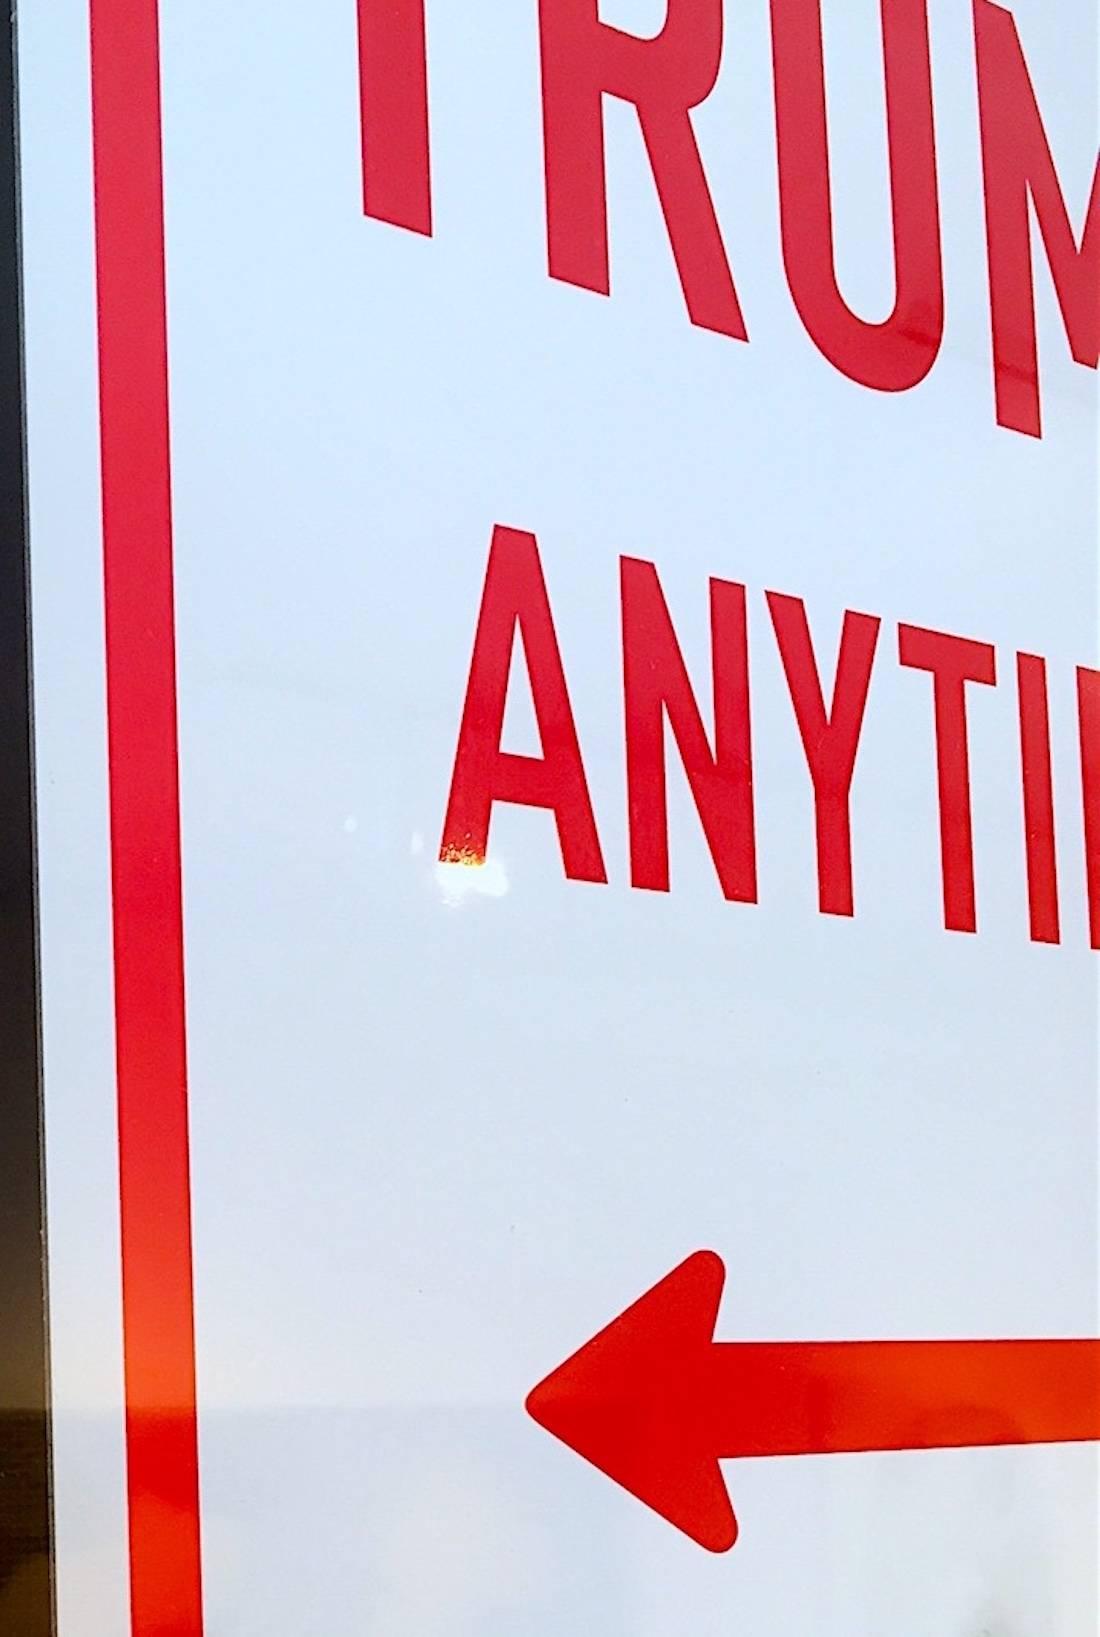 No Trump Anytime Sign (actual sign hung by Trump Wall st) - Contemporary Mixed Media Art by Plastic Jesus